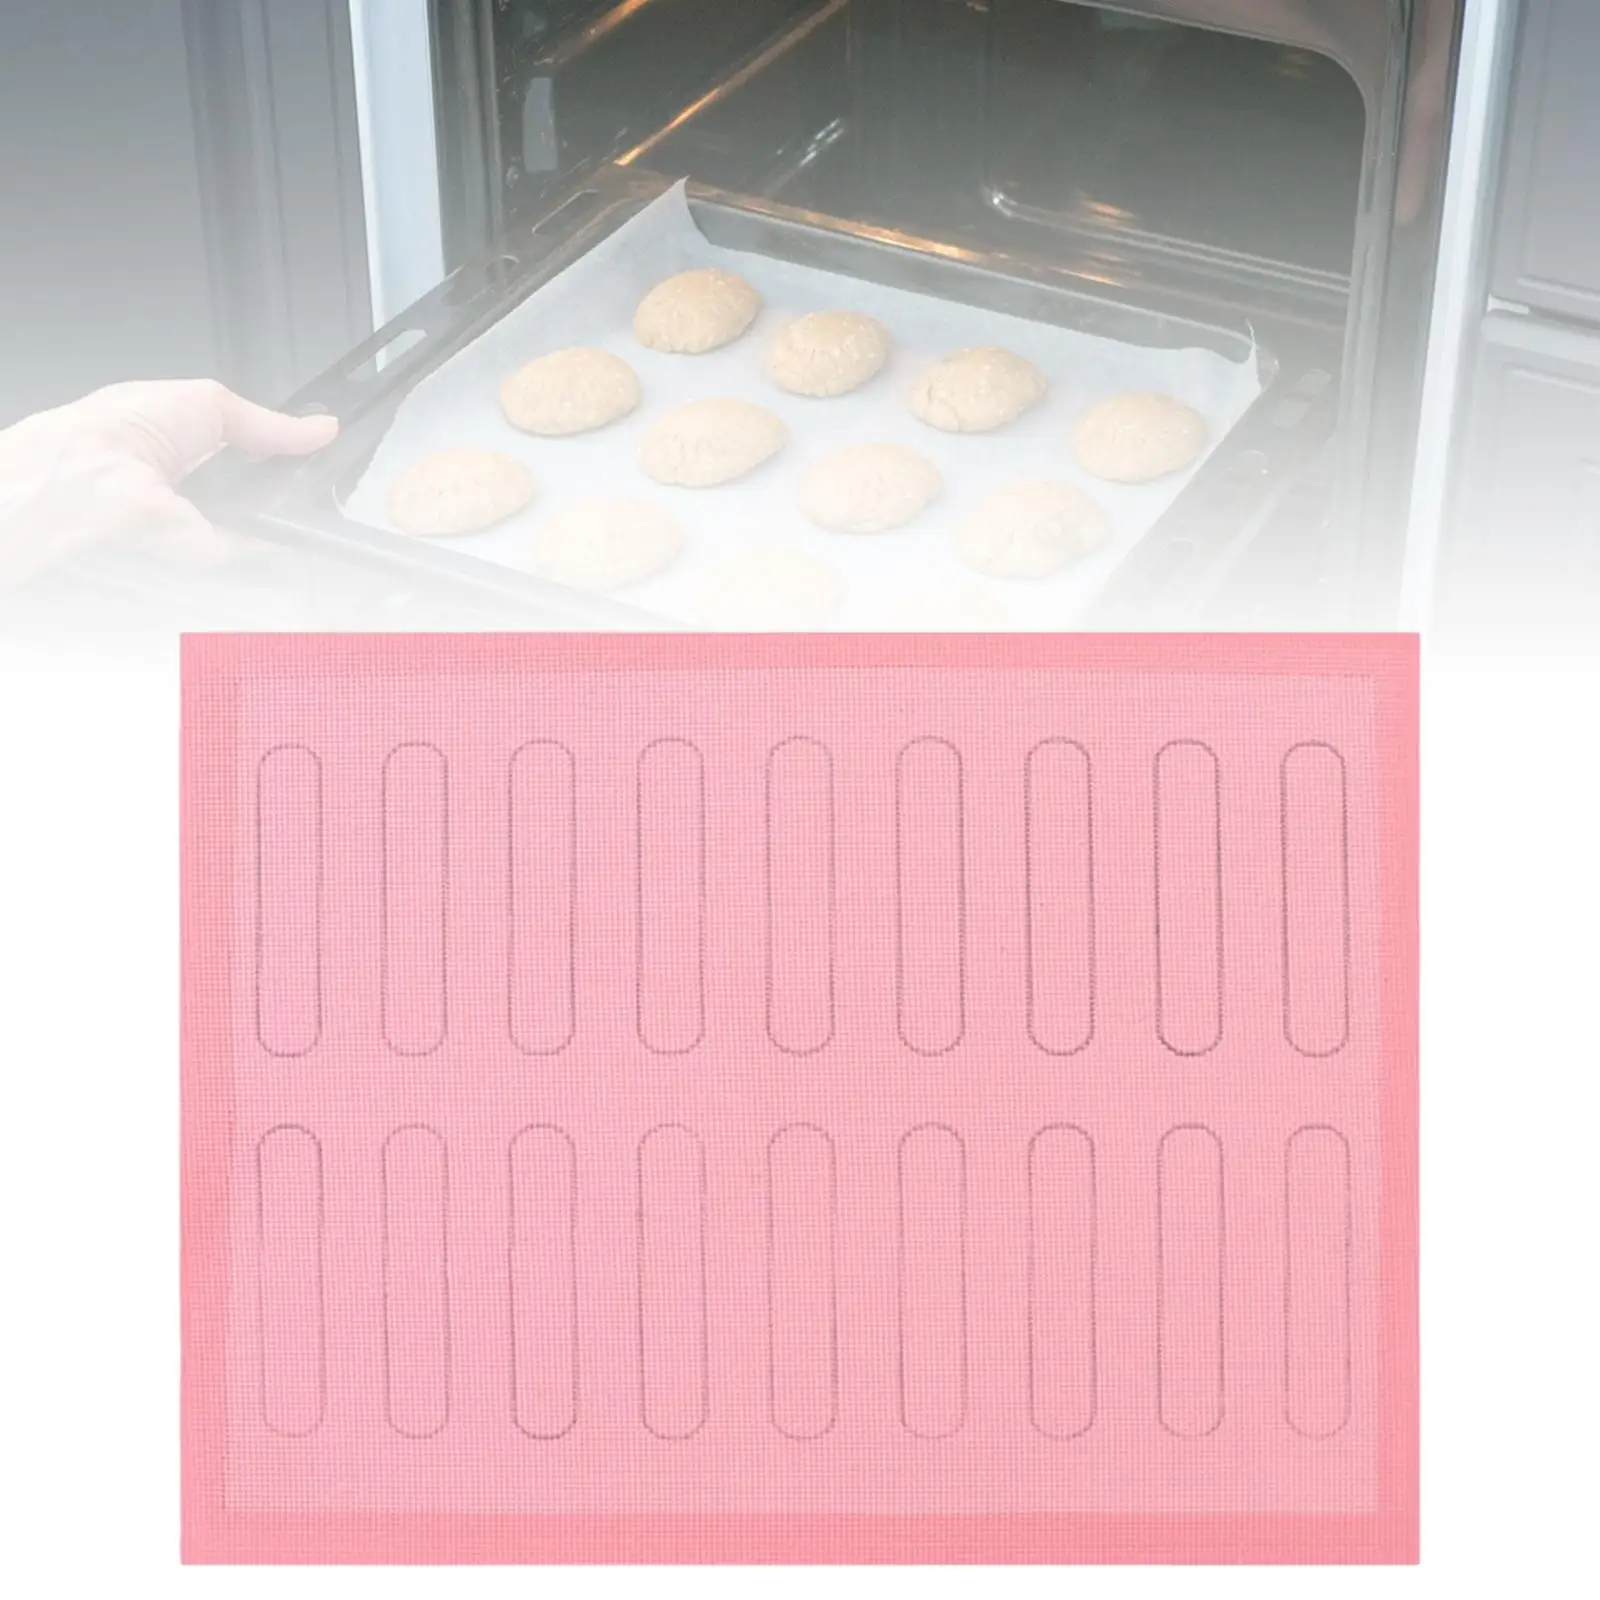 Silicone Baking Sheet Reusable Cake Pan Mat Oven Liner Bread Making Tools Baking Mat for Kitchen Dining Room Home